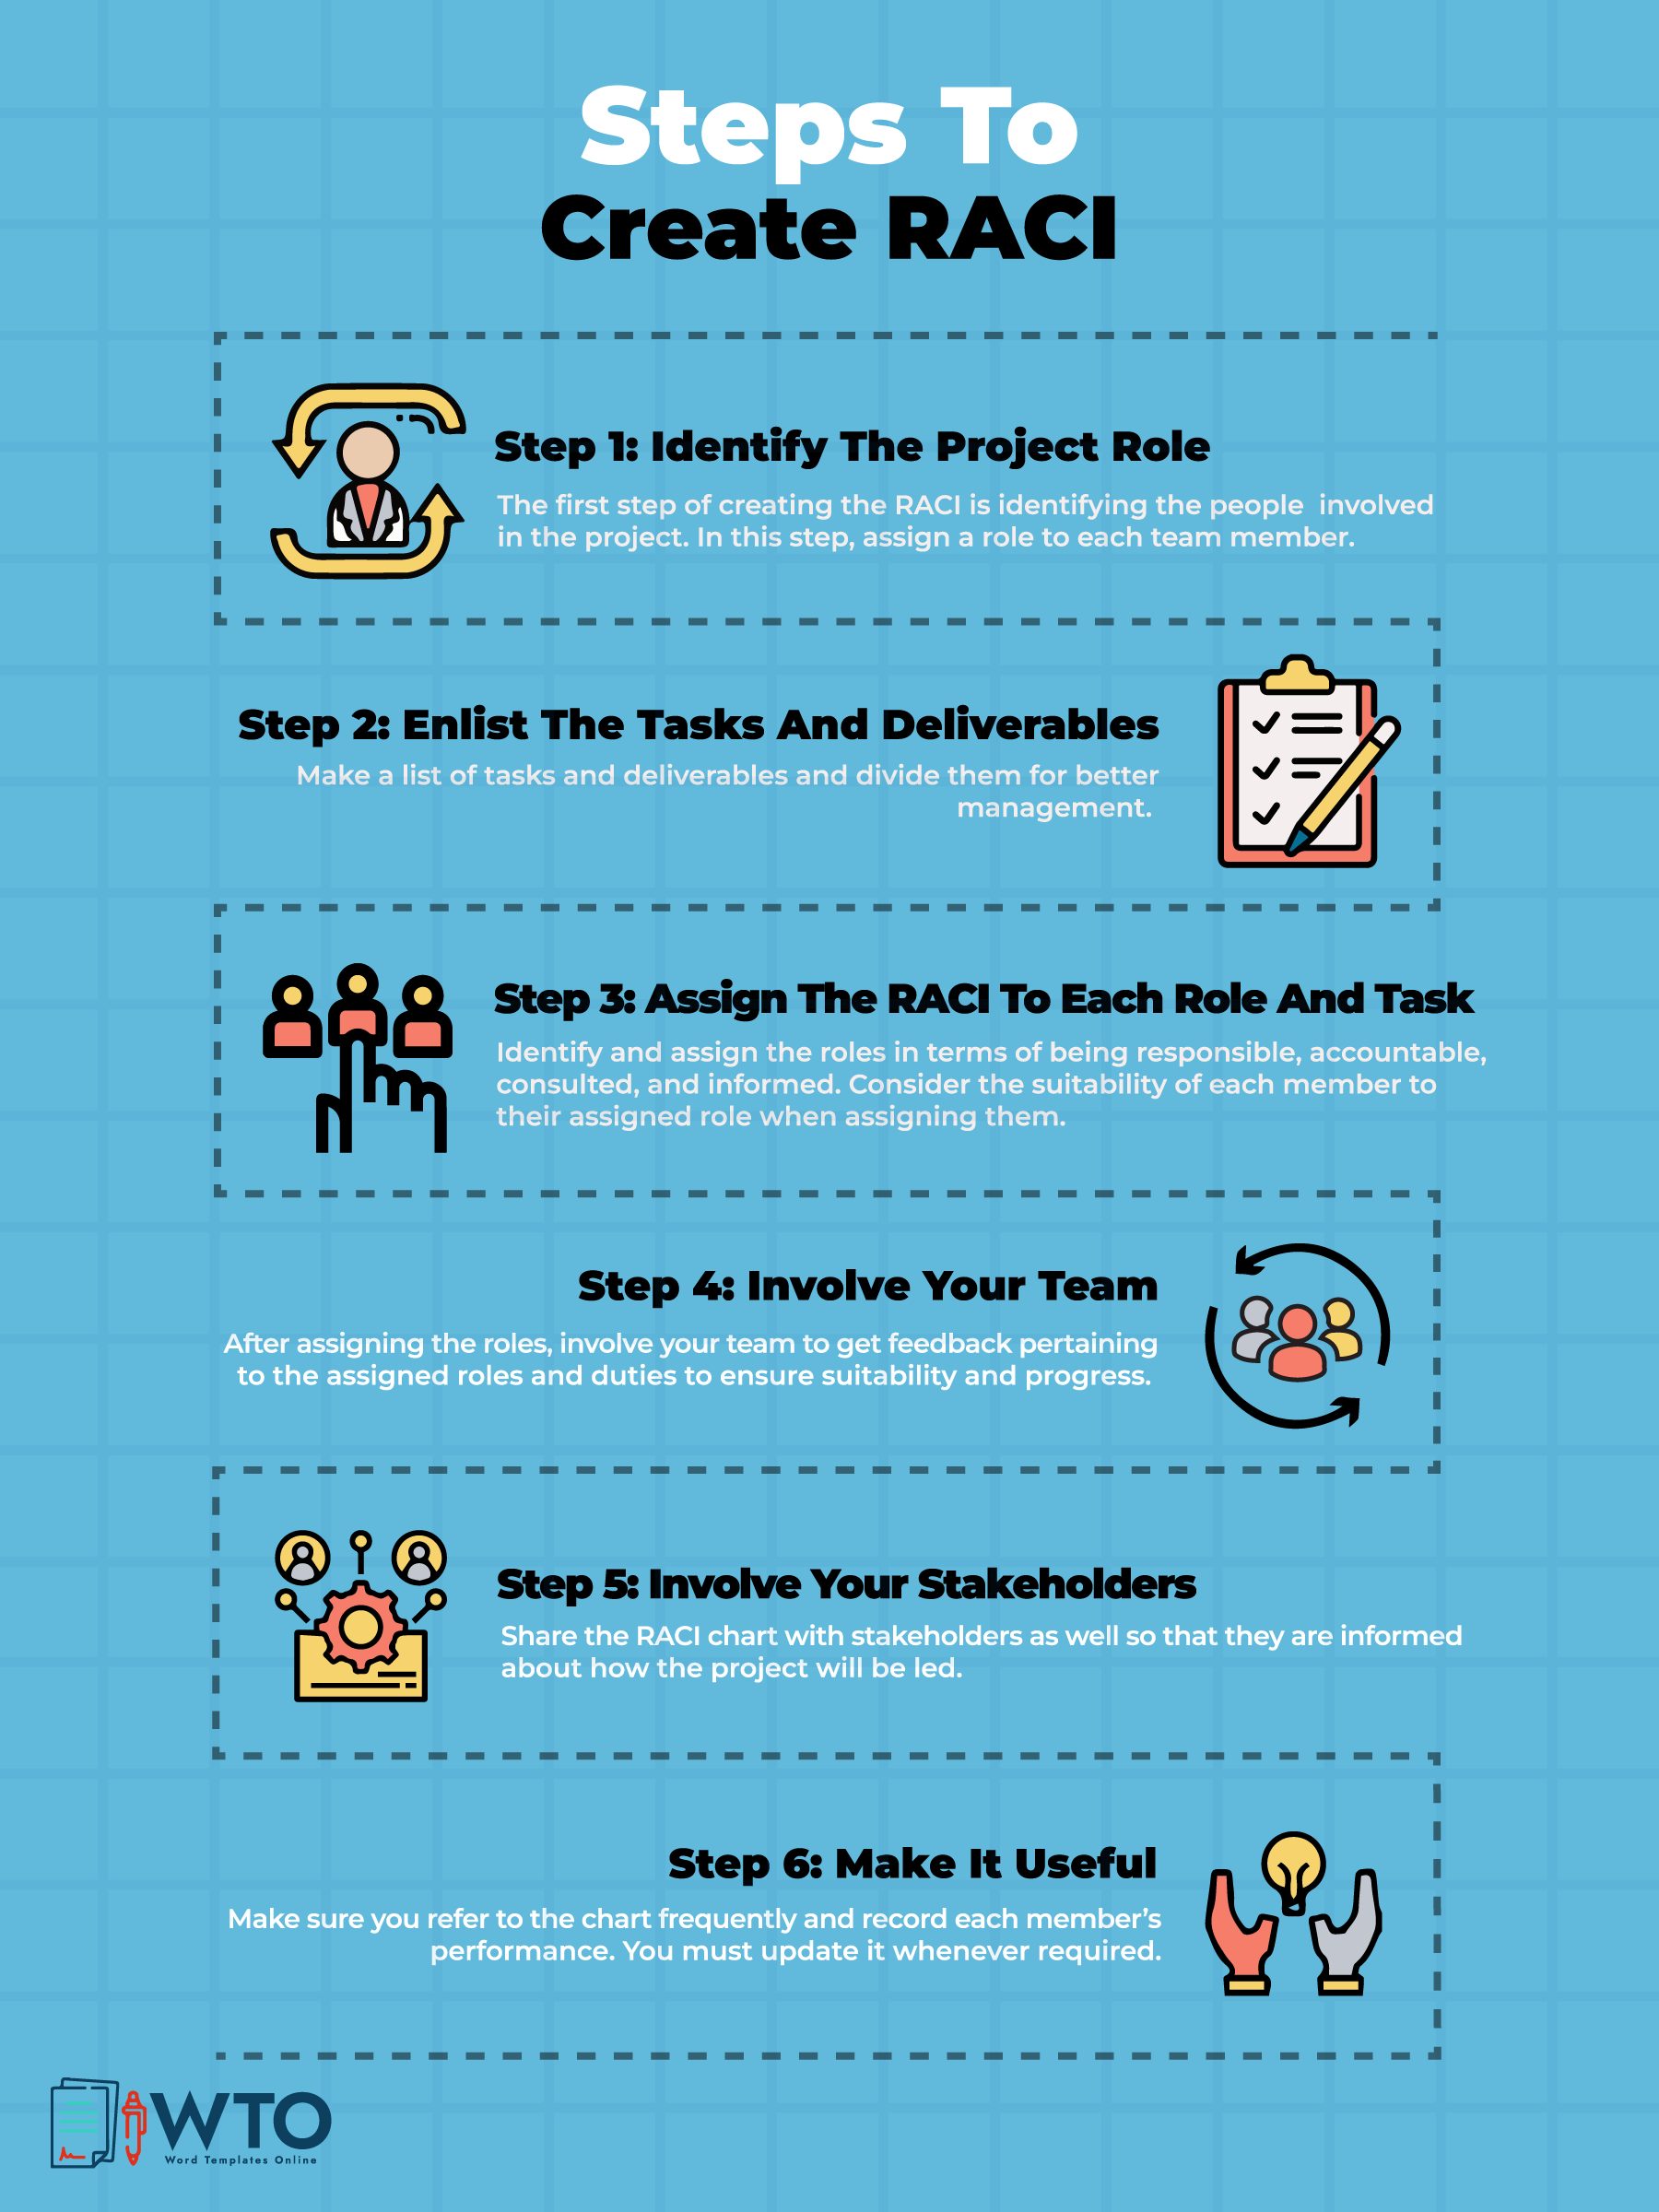 This infographic is about creating RACI.